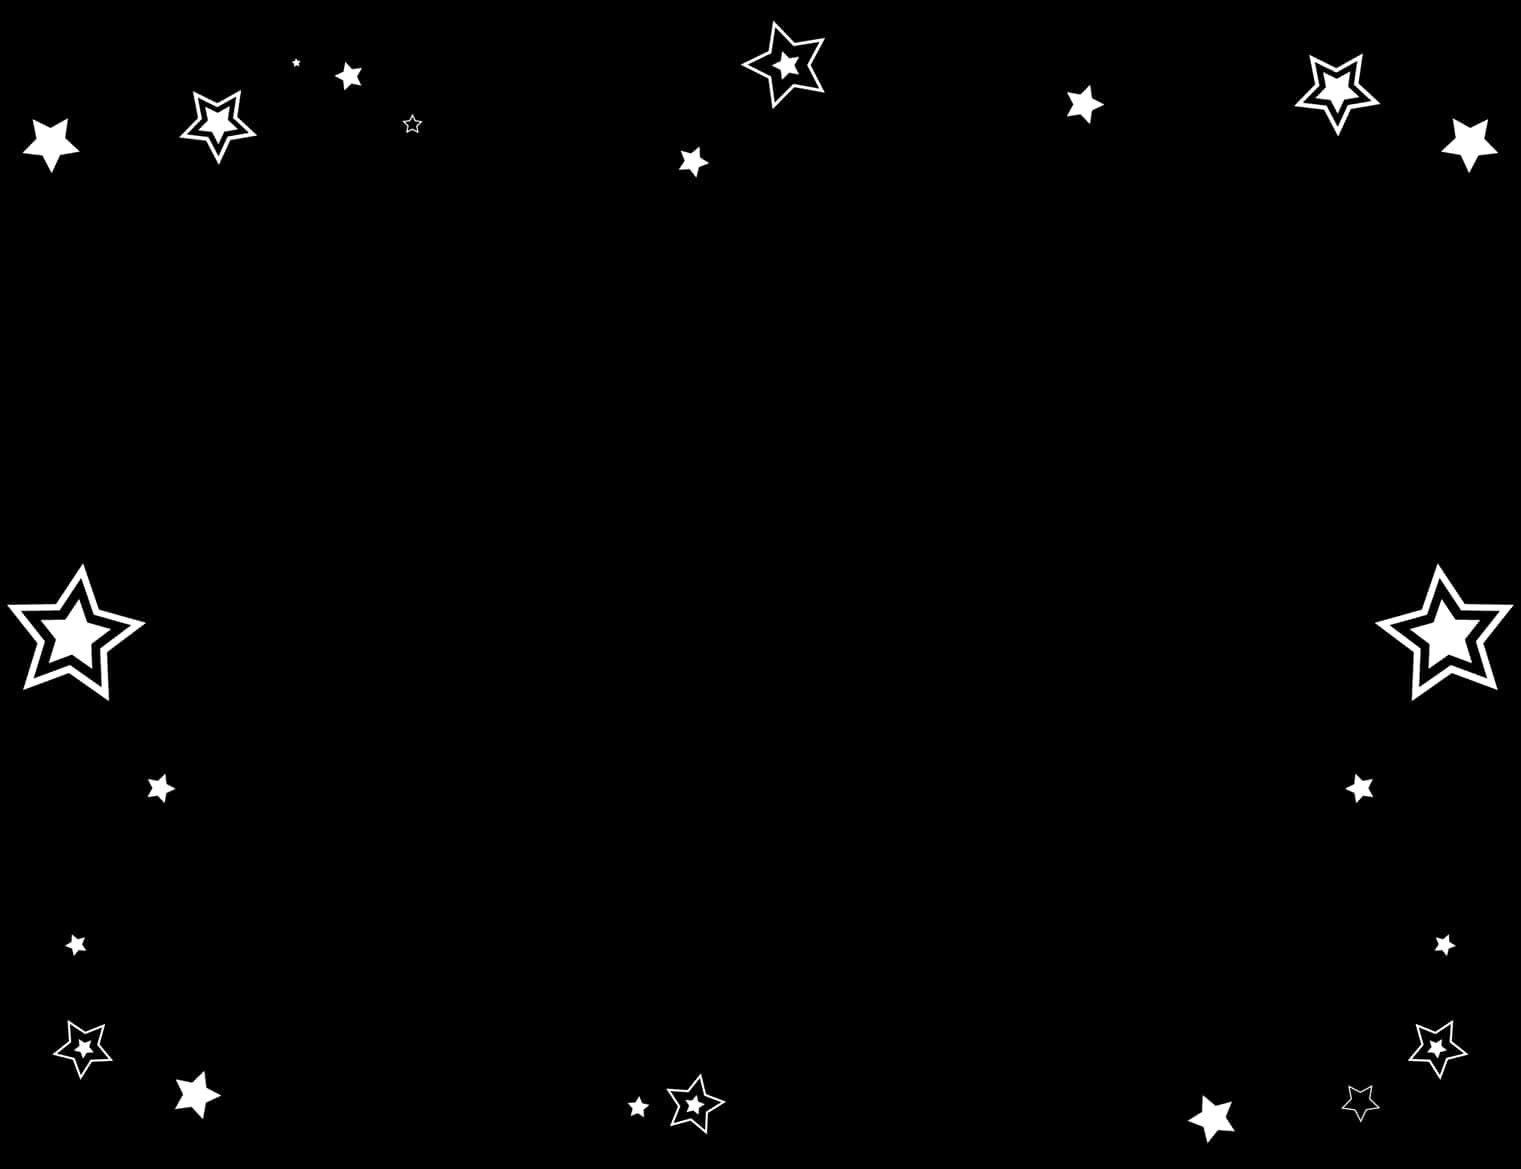 A Black Background With White Stars